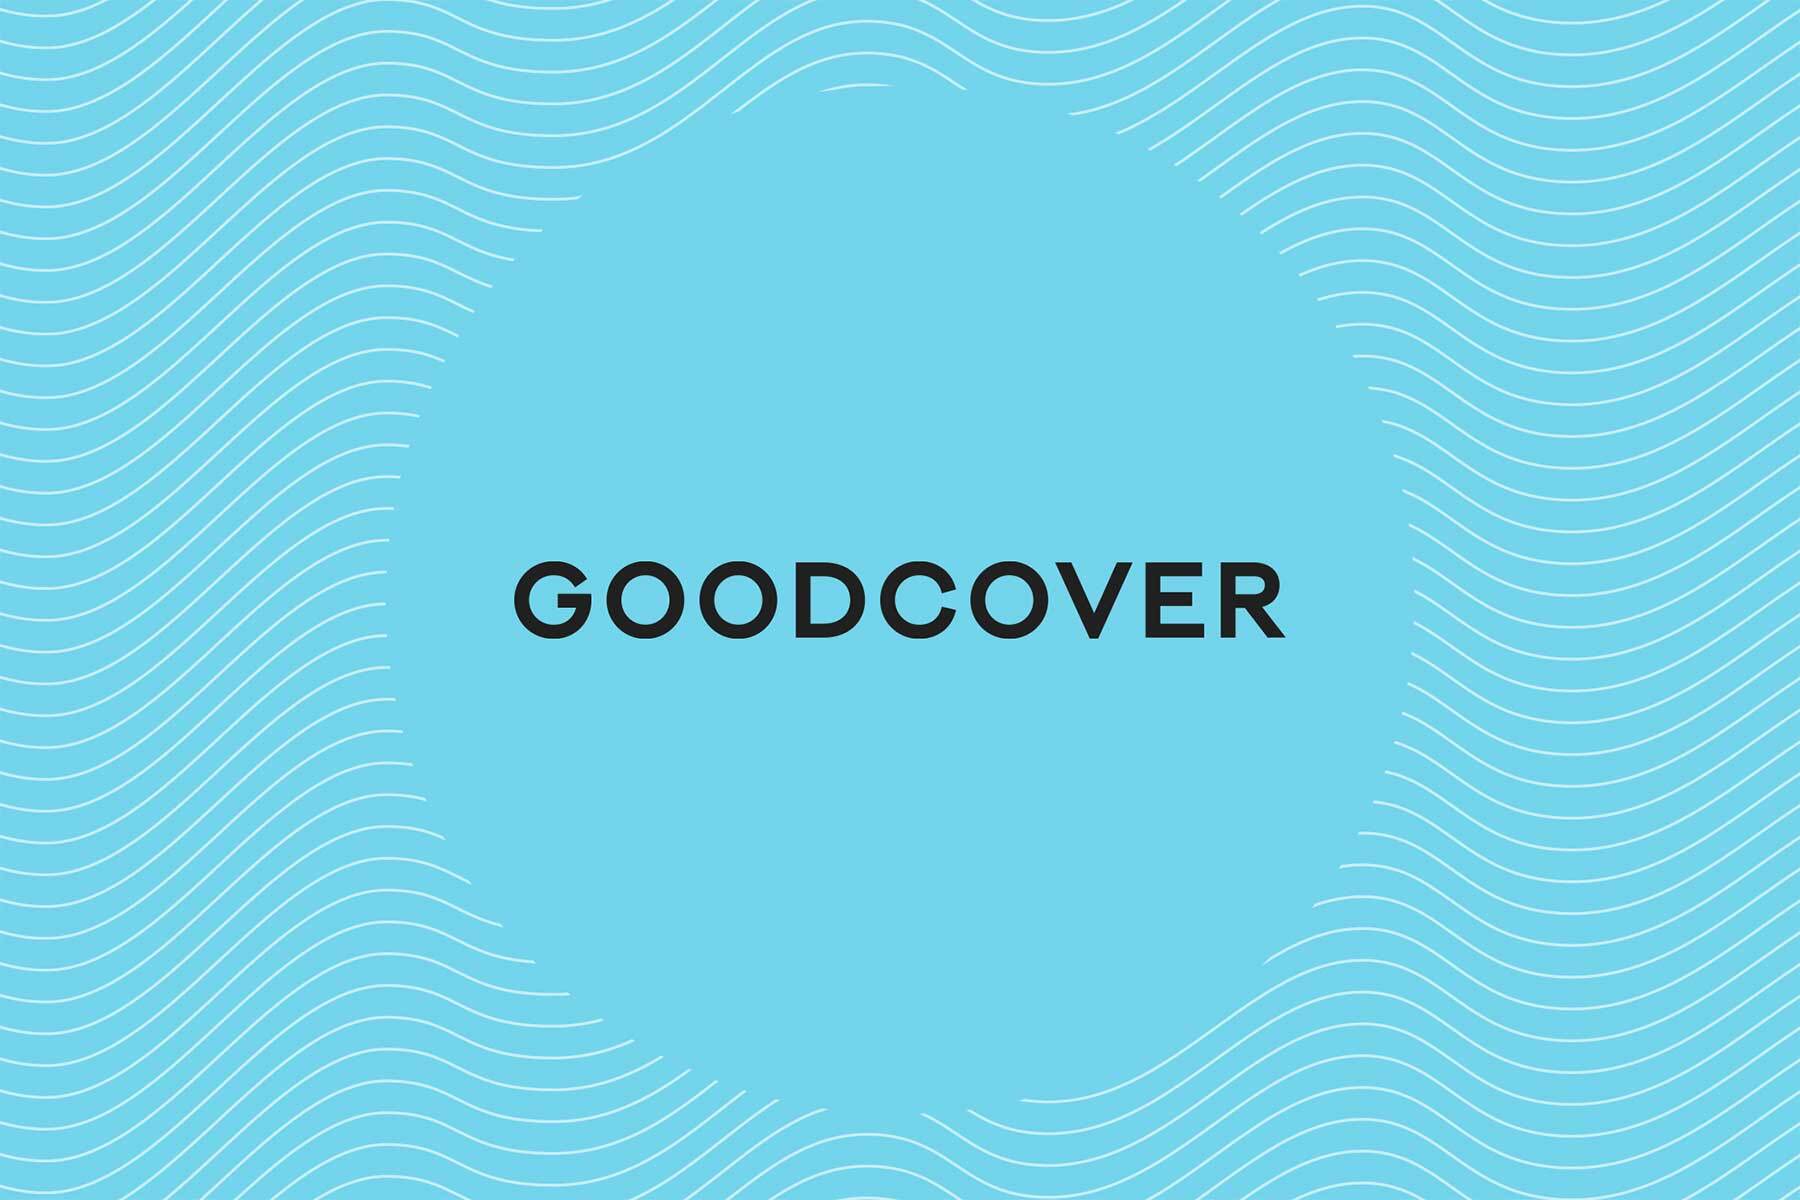 Goodcover & COVID-19: Full Service and Flexible Deadlines